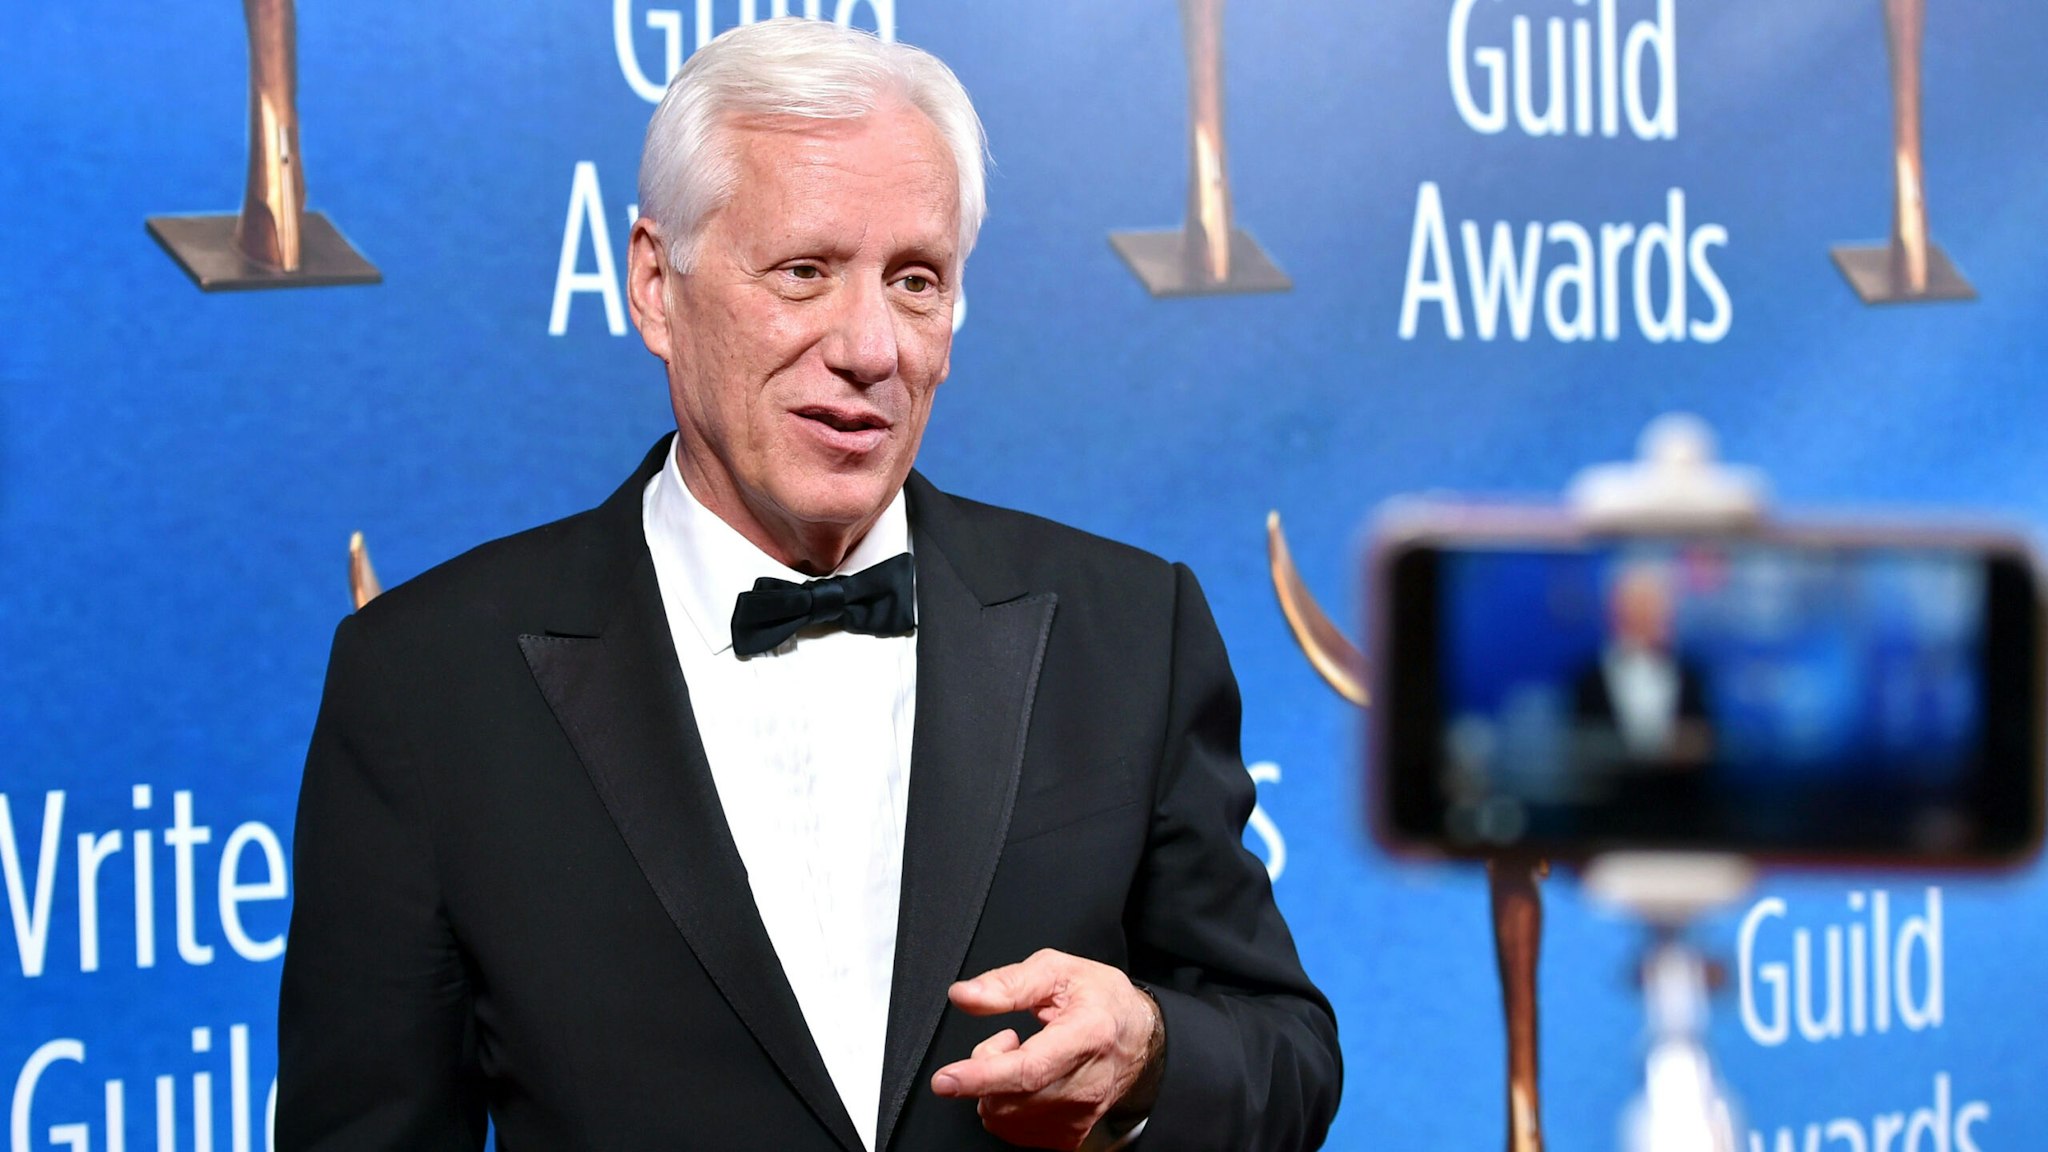 BEVERLY HILLS, CA - FEBRUARY 19: Actor James Woods attends the 2017 Writers Guild Awards L.A. Ceremony at The Beverly Hilton Hotel on February 19, 2017 in Beverly Hills, California.